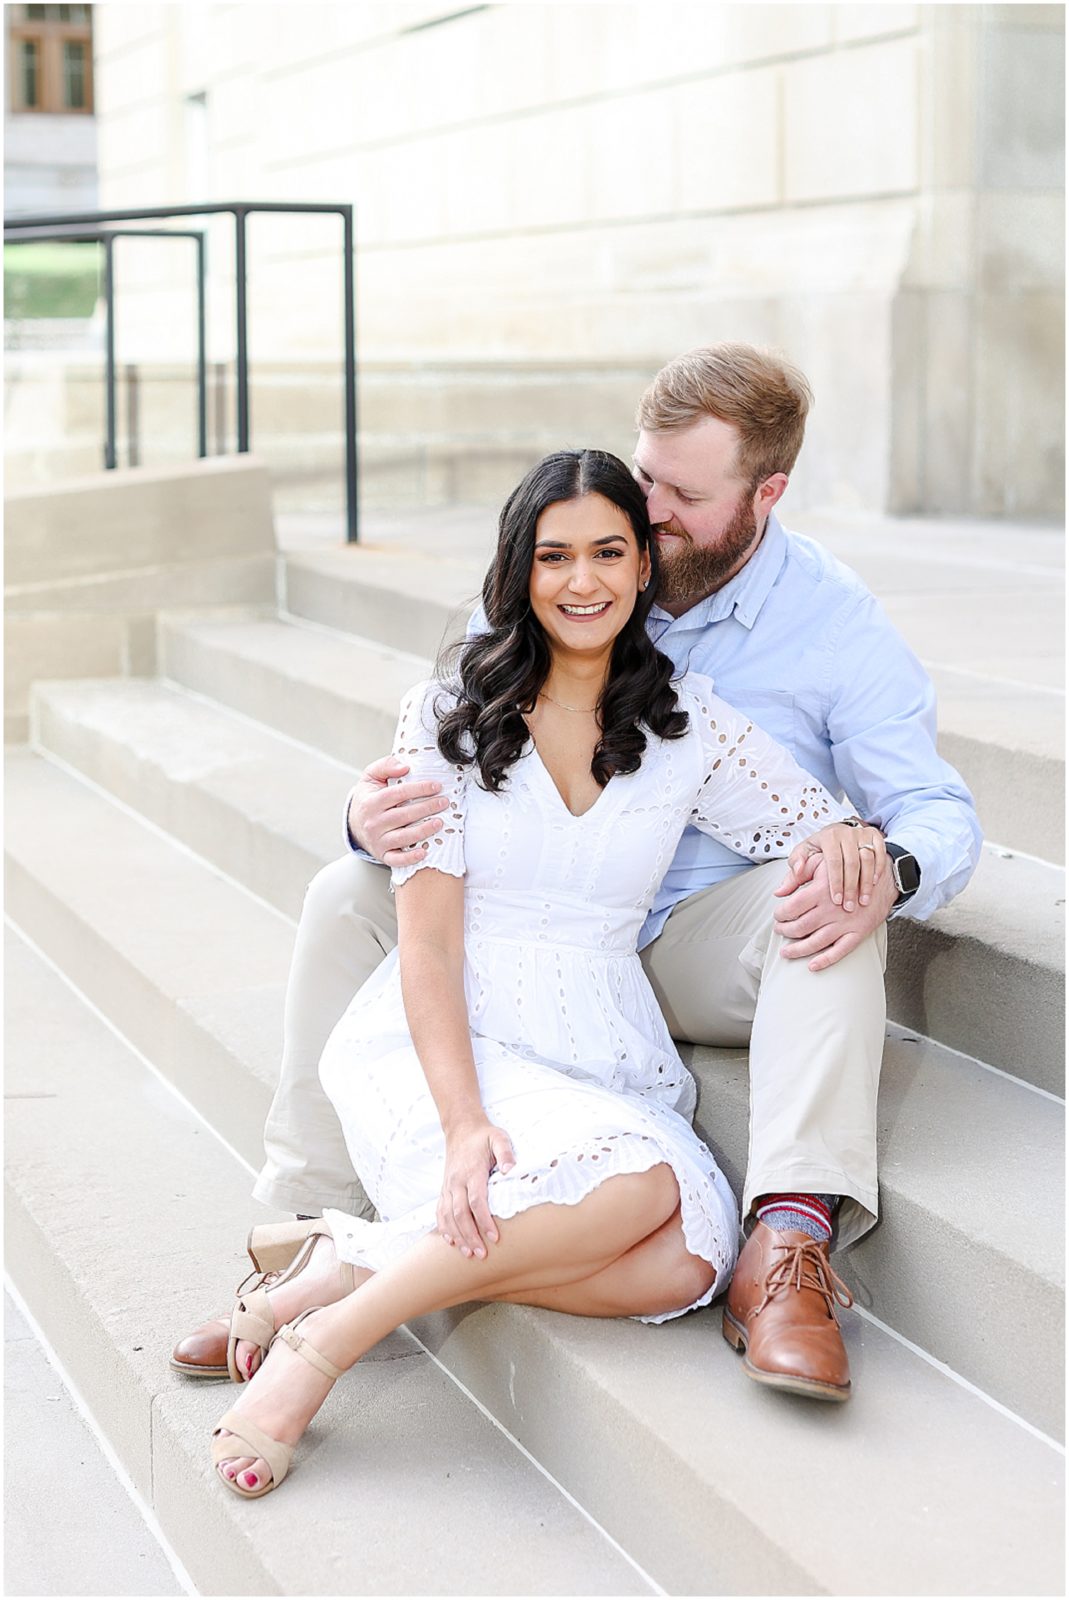 How to Prepare for Your Engagement Session with Your Wedding Photographer | Kansas City based Wedding and Portrait Photographer Tips and Tricks on What to Wear and Where to Take Photos